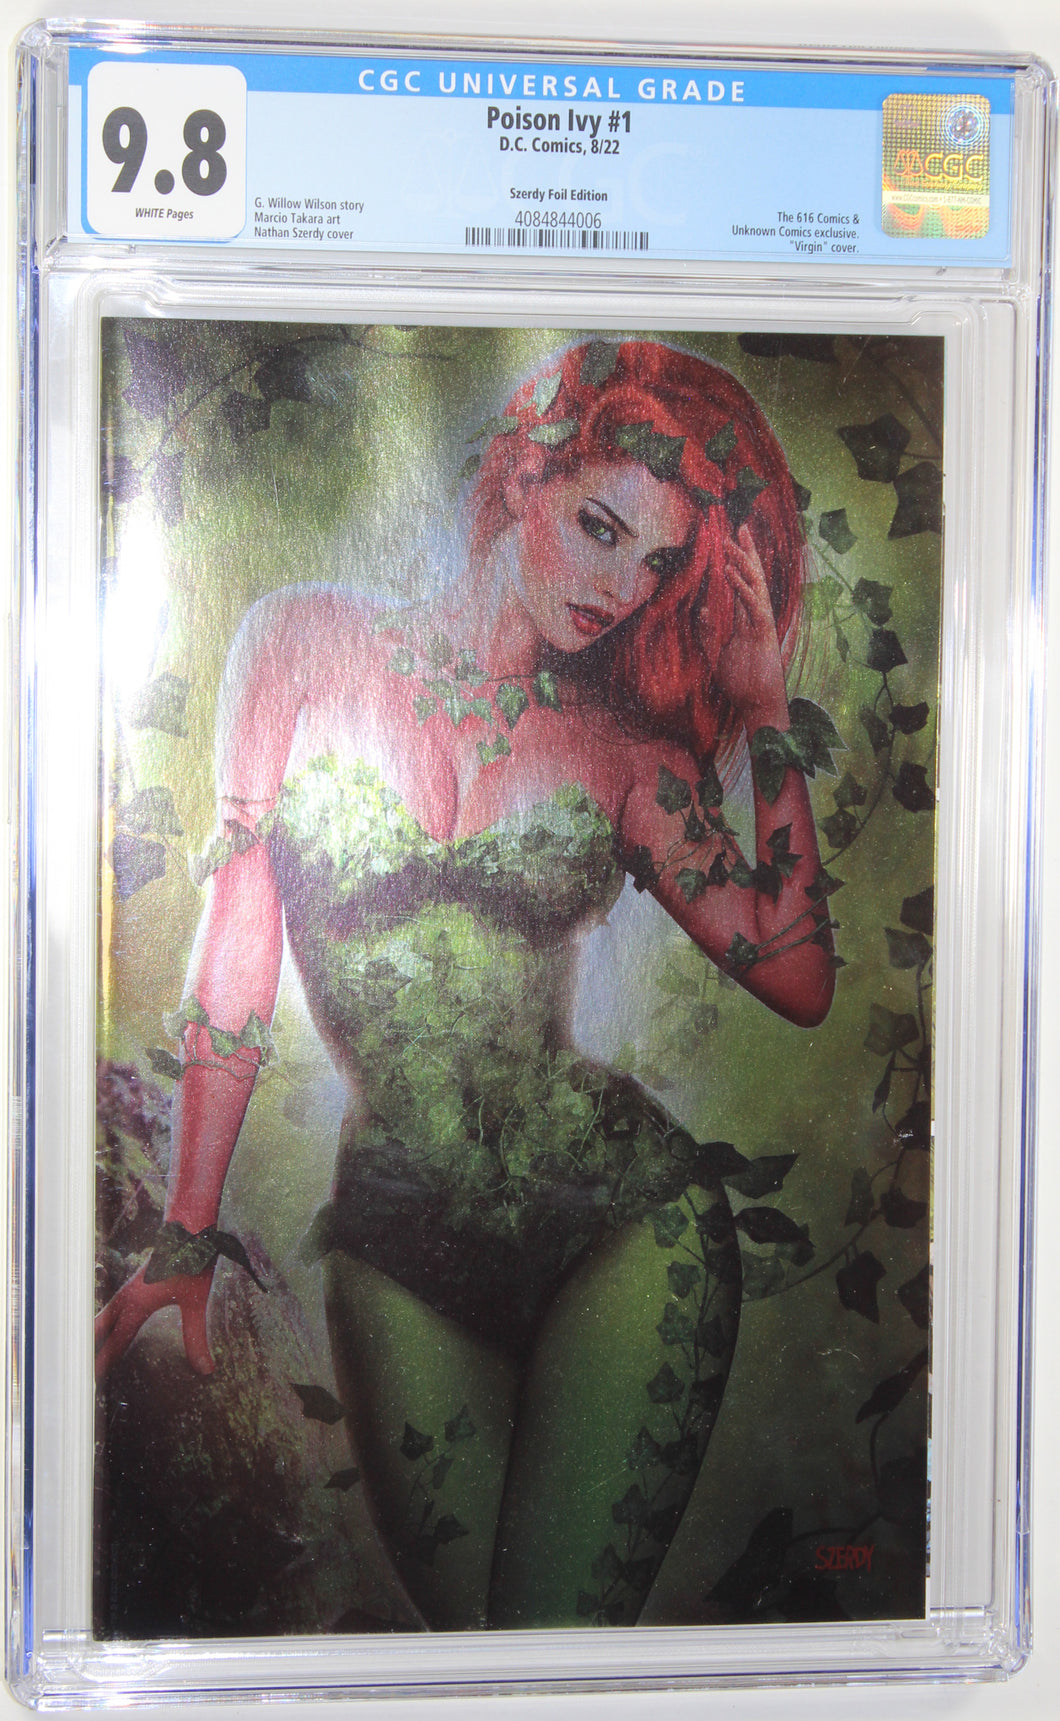 POISON IVY #1 (NATHAN SZERDY EXCLUSIVE FOIL VIRGIN VARIANT) CGC GRADED 9.8